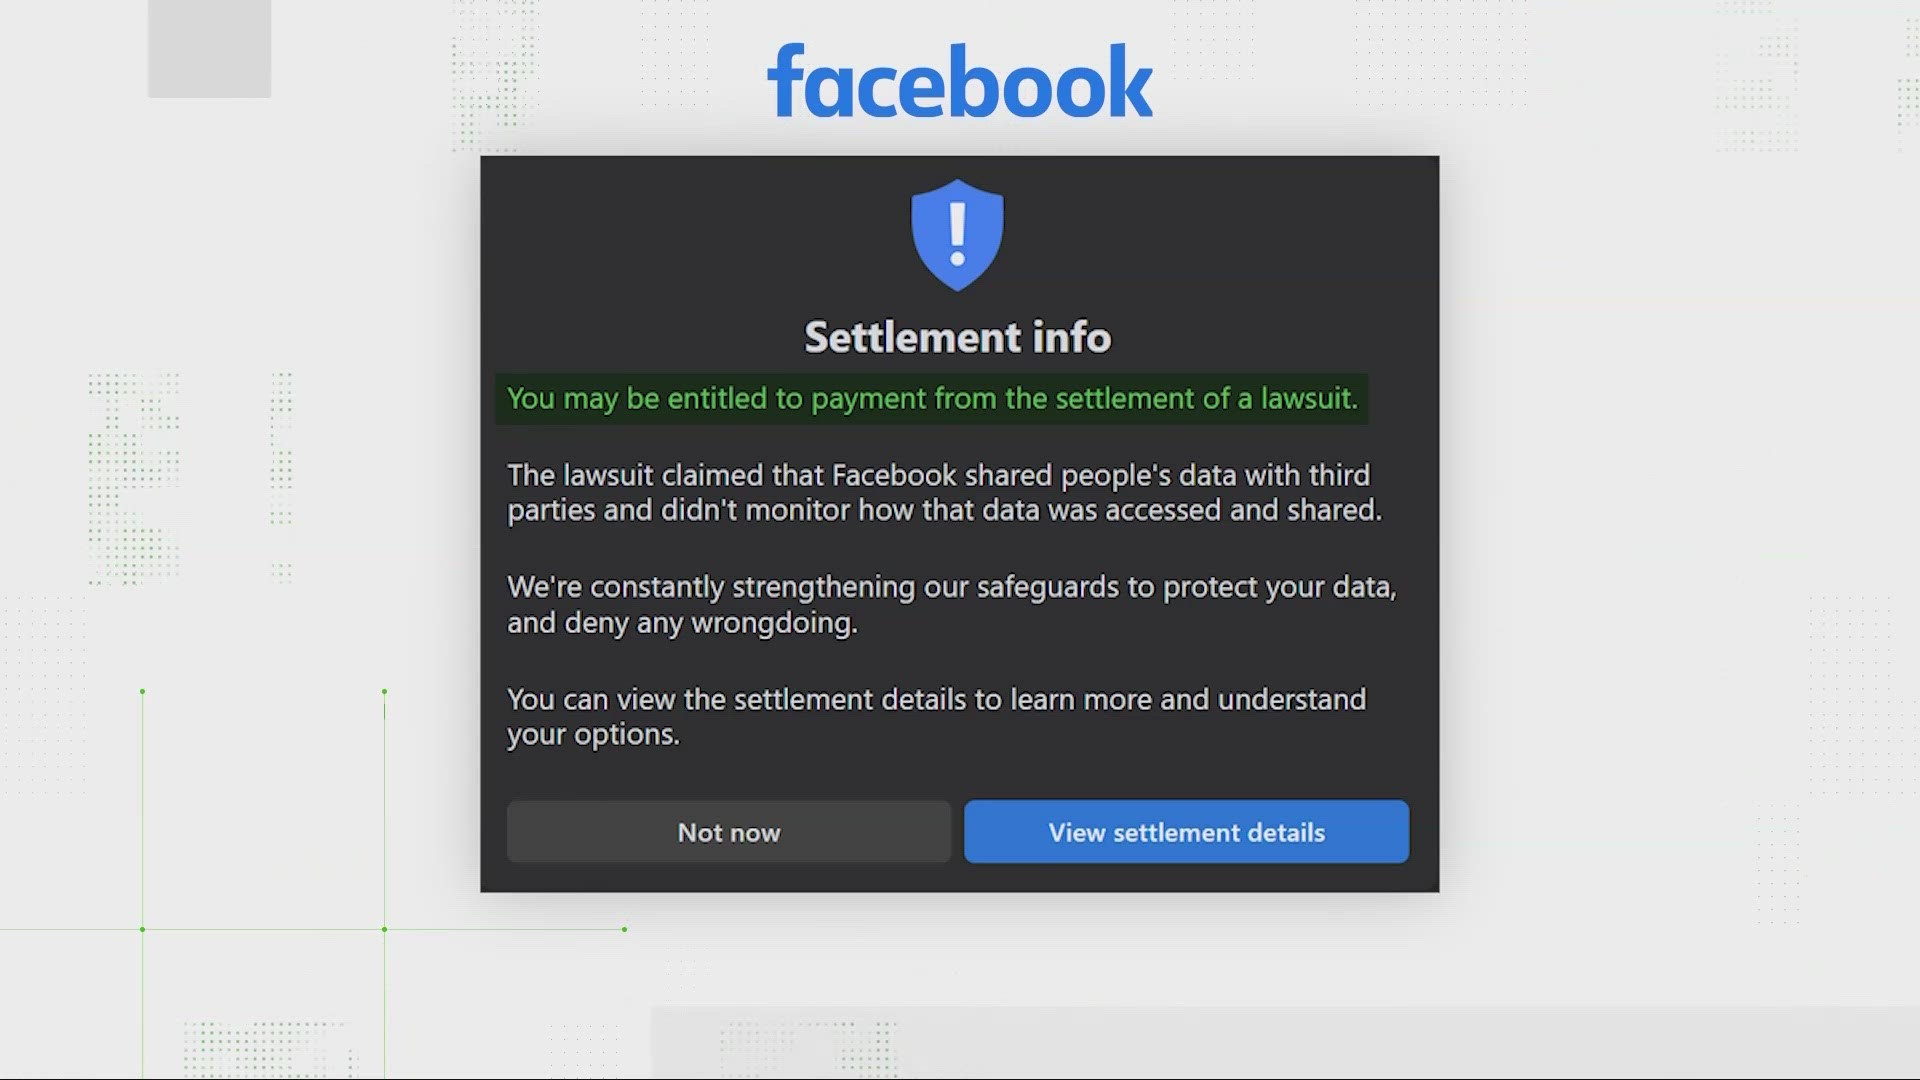 Many Facebook users received a notification about a class-action settlement. It’s real. Here’s how to know if you qualify for a cash payment.